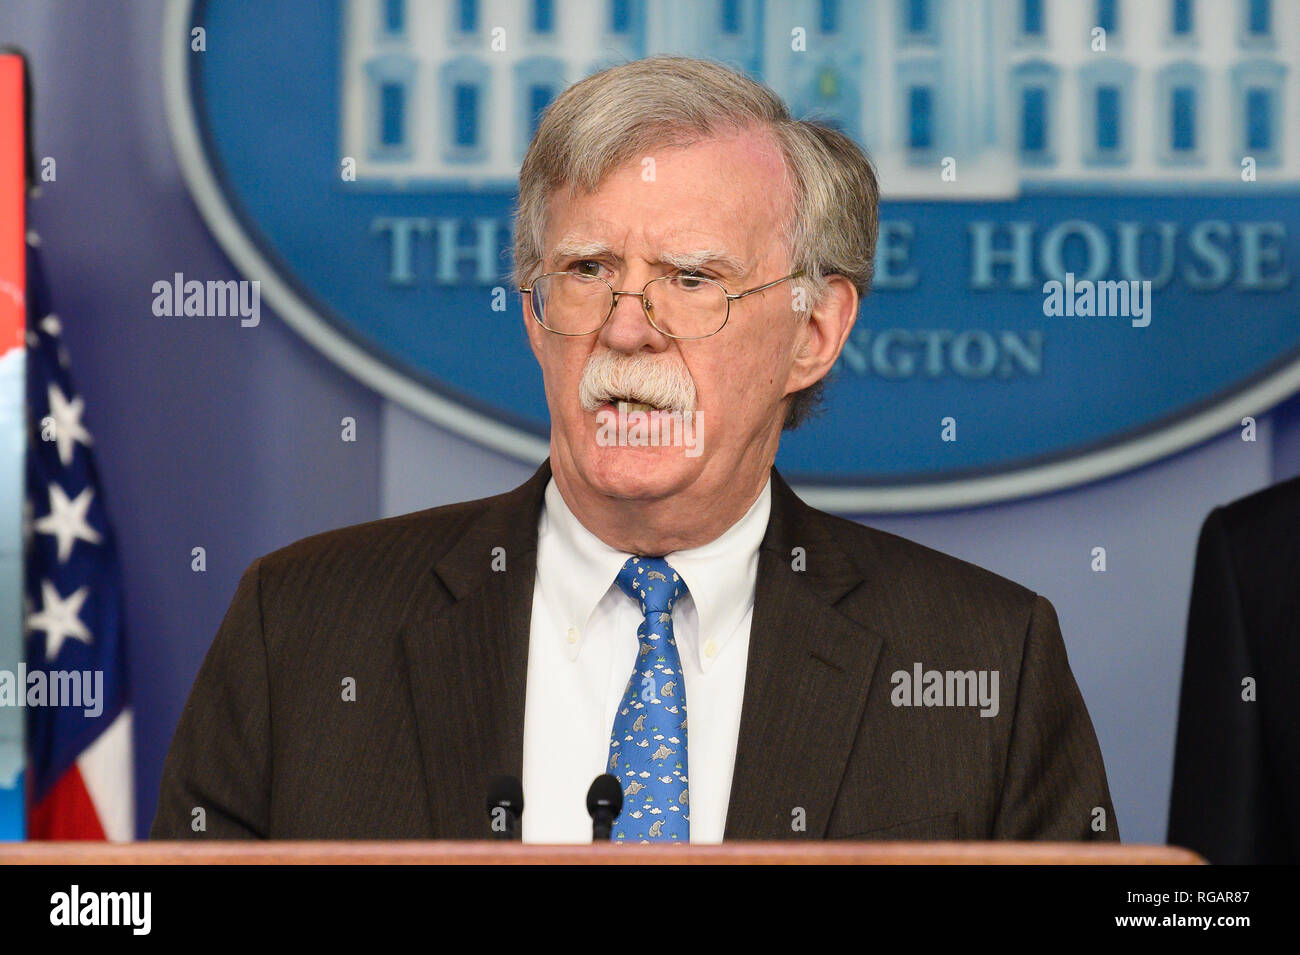 John Bolton, National Security Advisor of the United States, in the White House Press Briefing room at the White House in Washington, DC. Stock Photo